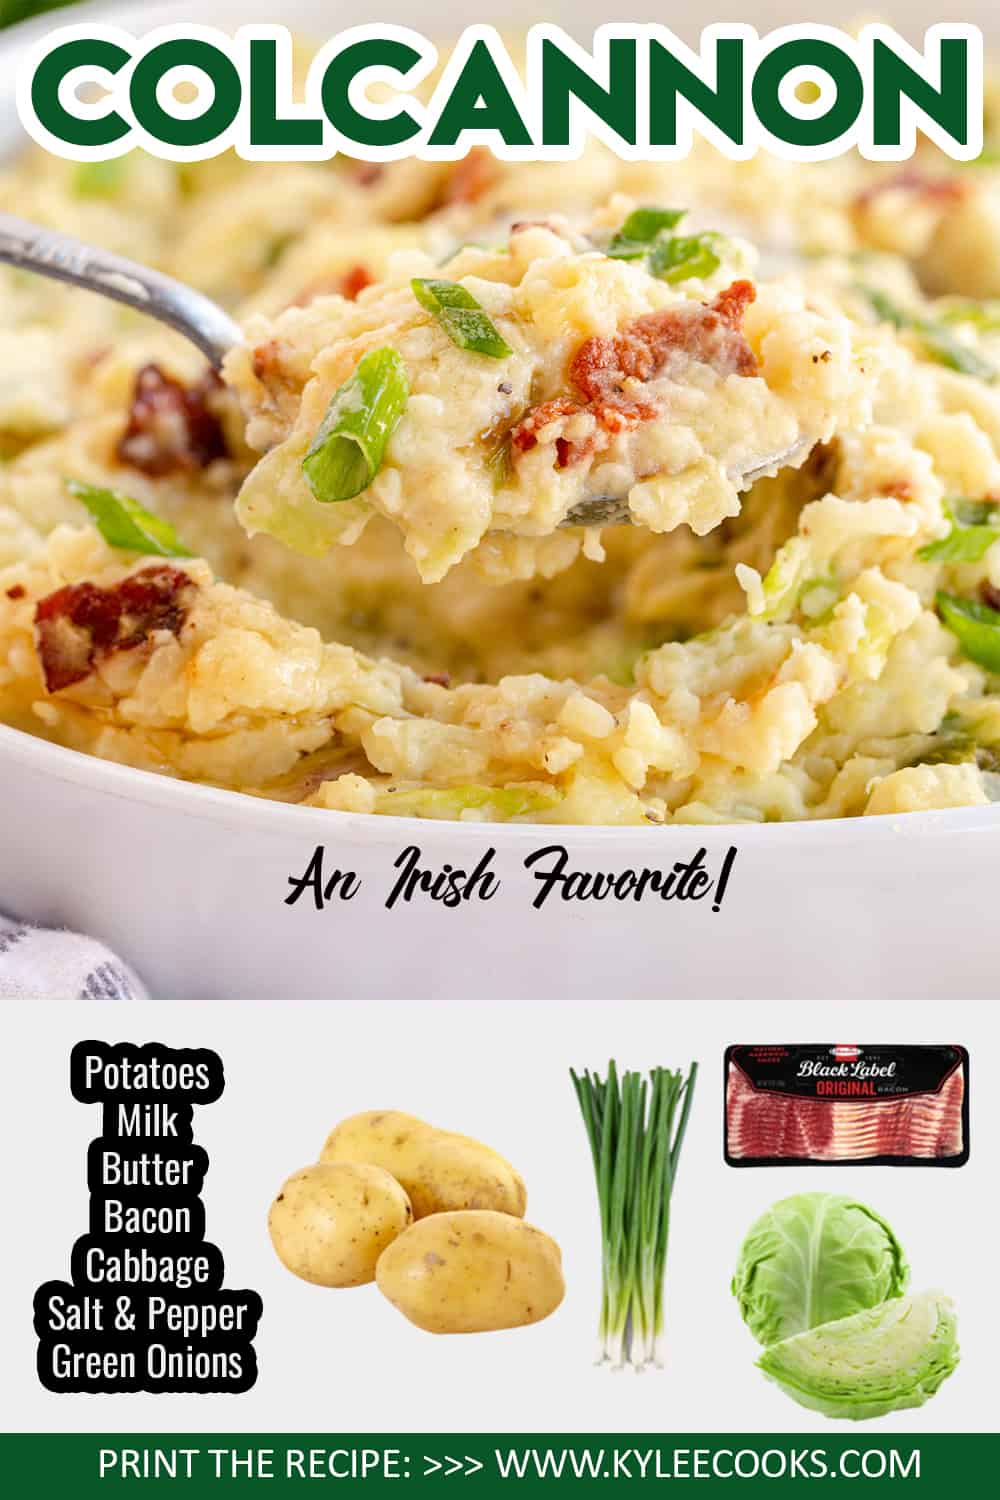 colcannon in a white bowl with recipe name overlaid in text